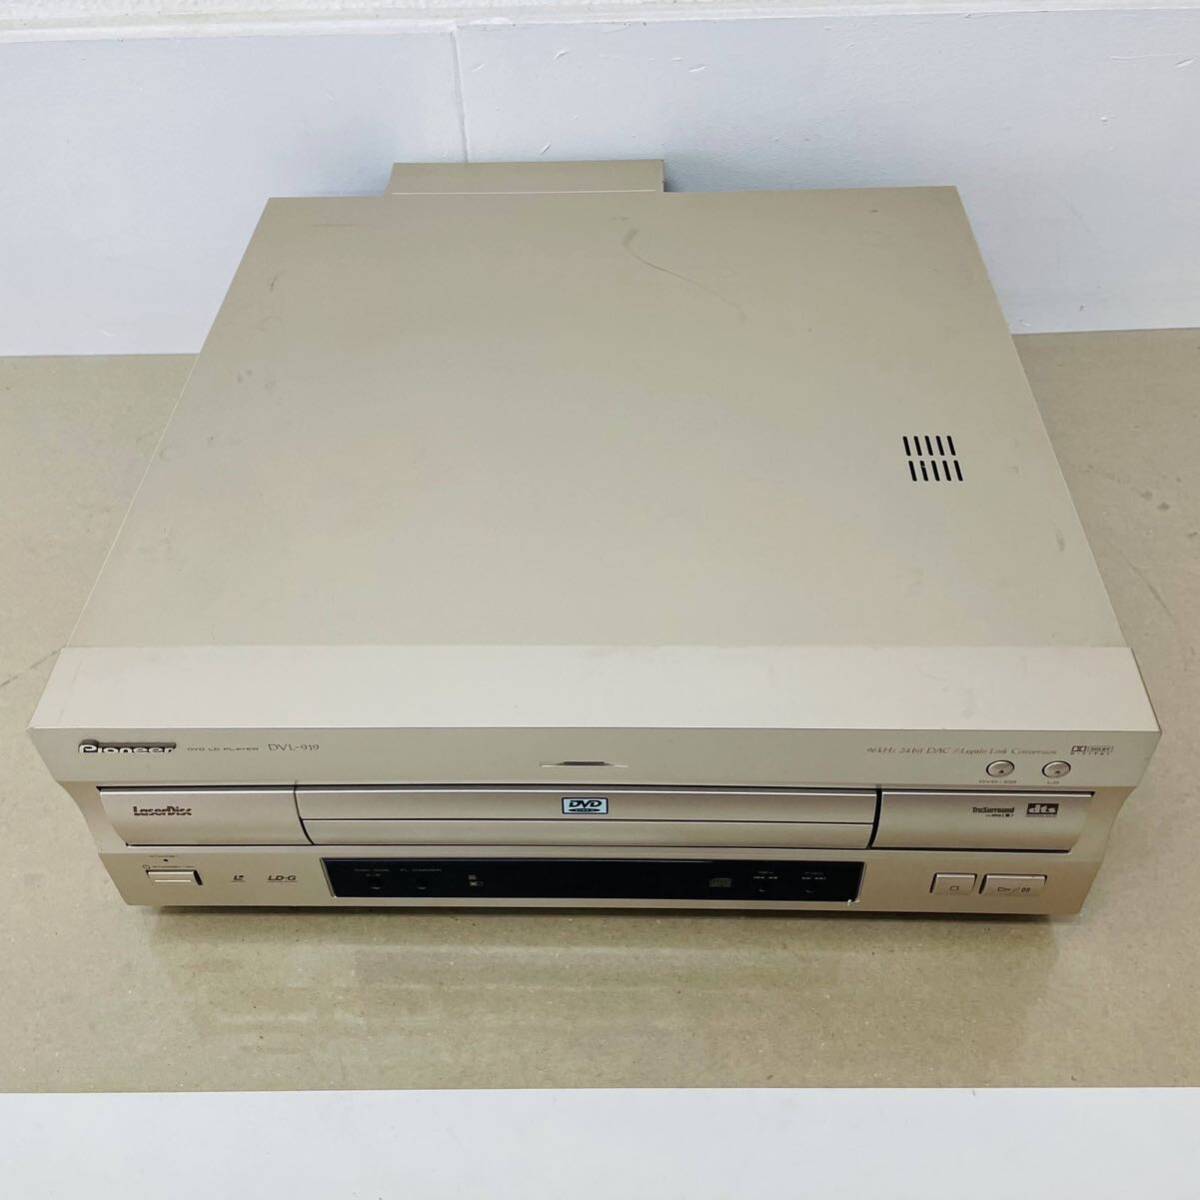  Junk Pioneer DVL-919 DVD LD player body only i15803 140 size shipping 